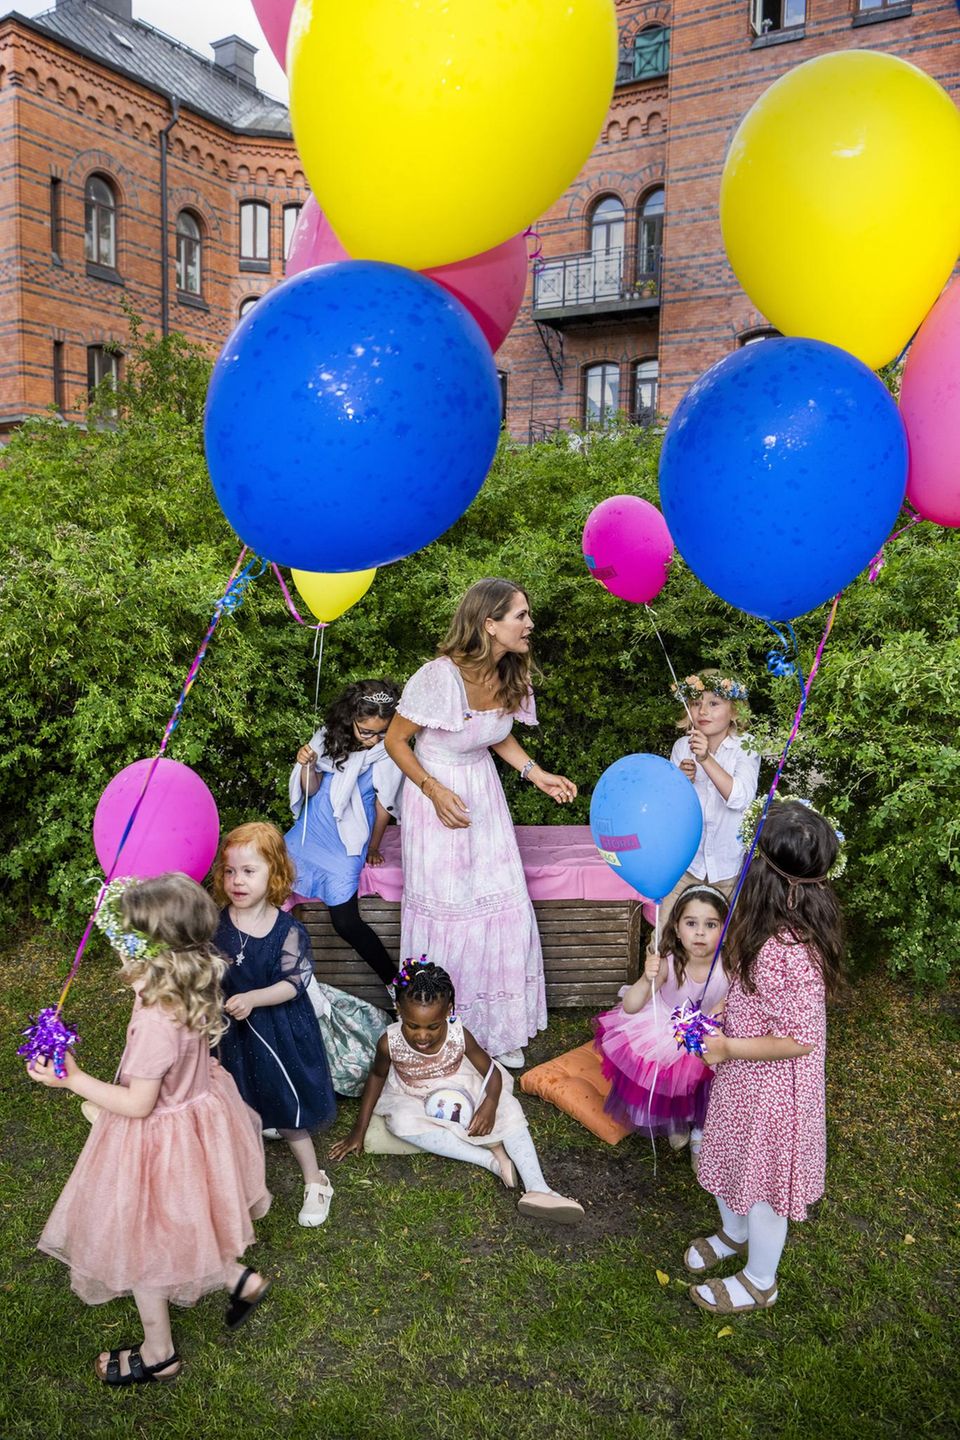 In June 2022, Princess Madeleine spent with the charity "Min Stora Dag" (eng.: "my big day"), which gives seriously ill children a zest for life, a wonderful day in the beautiful garden of the royal stables.